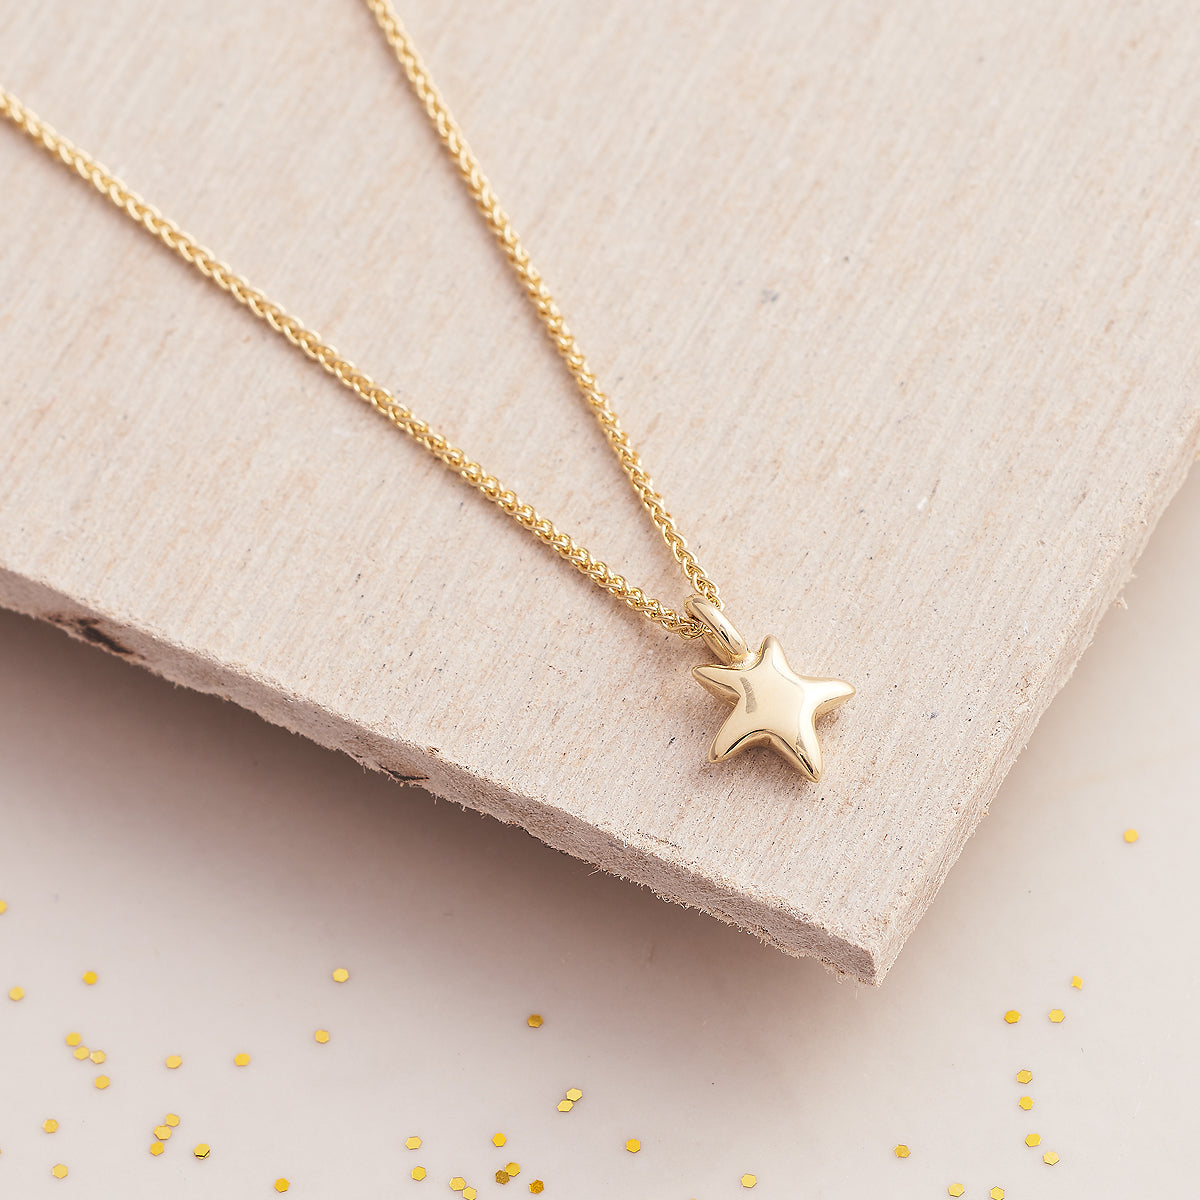 Stardust Silver or Gold Plated Necklace